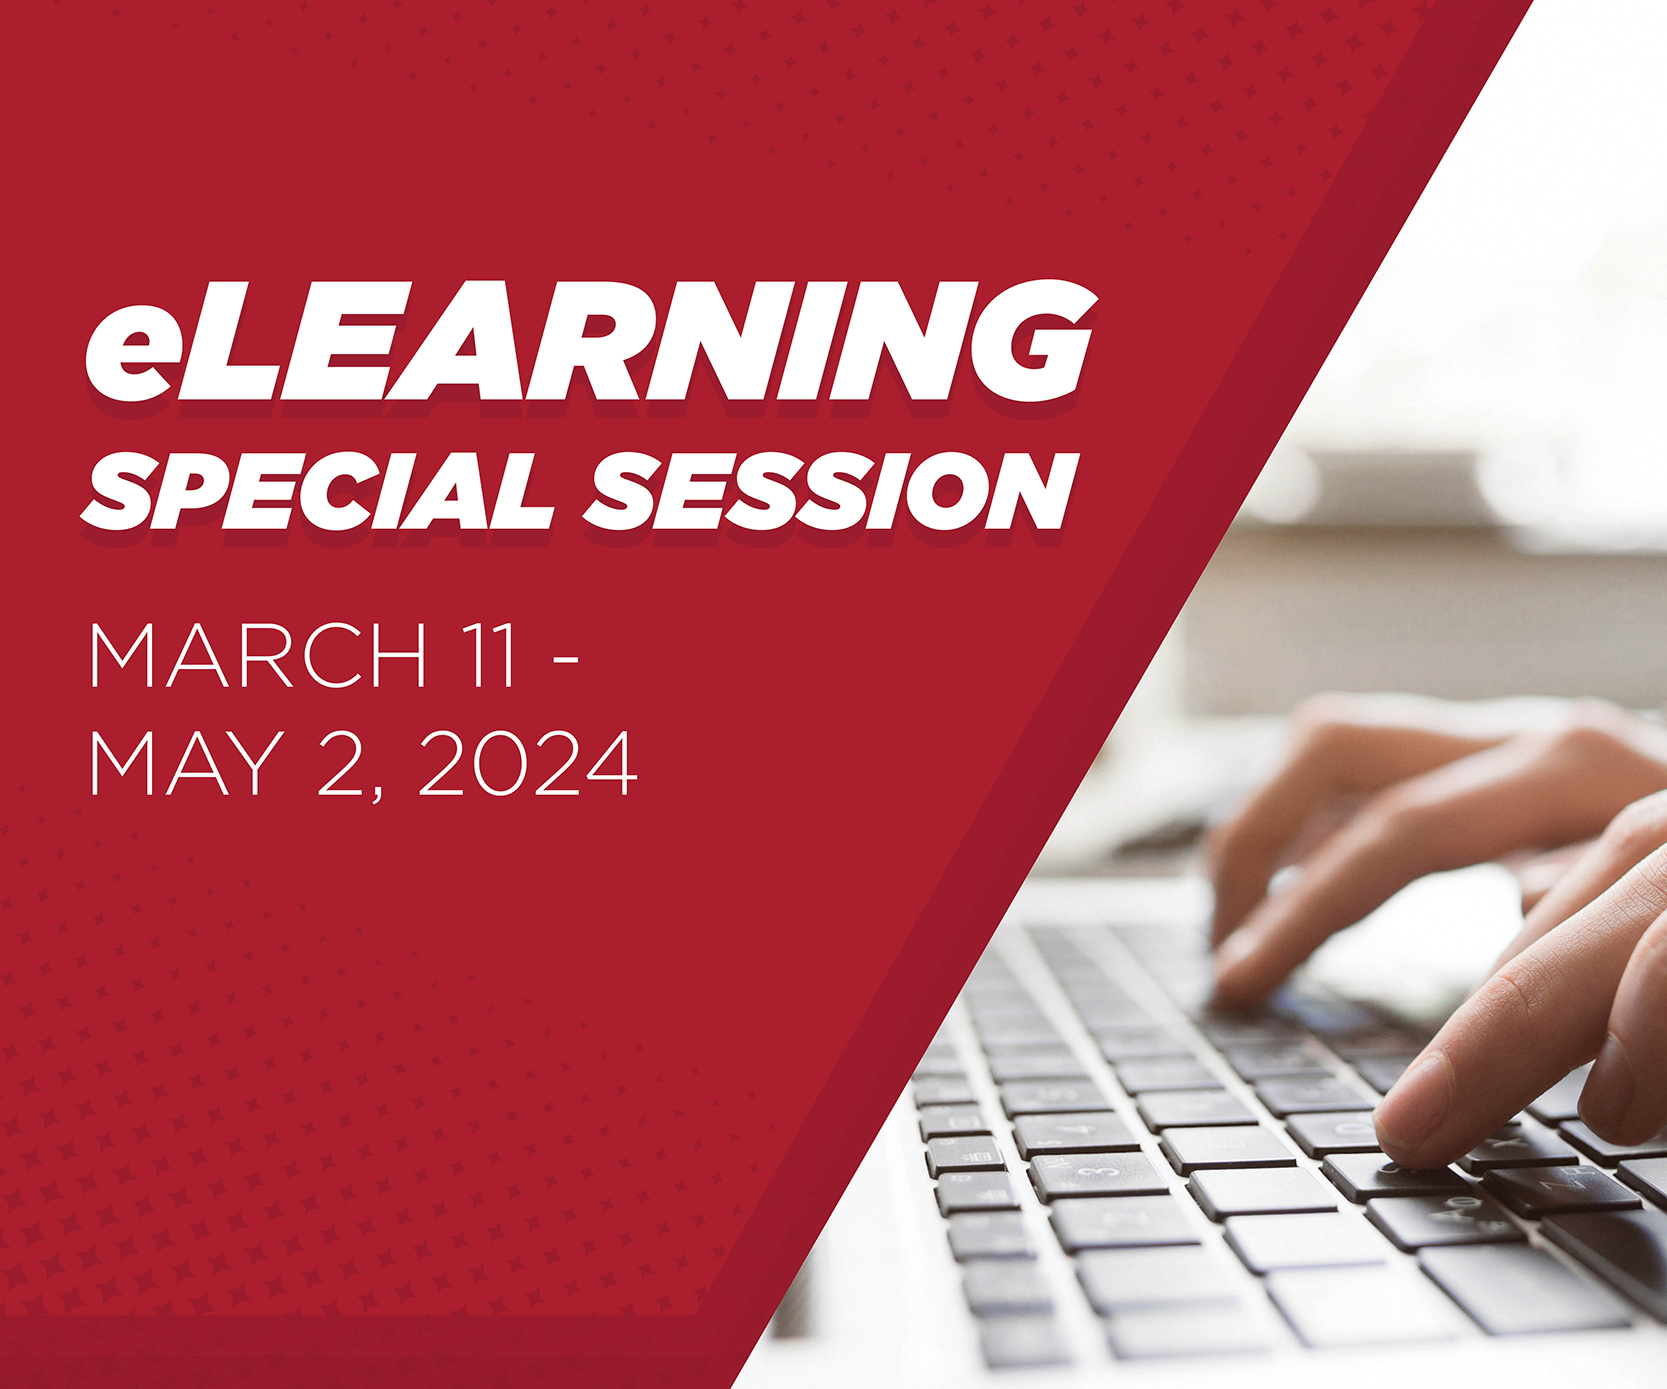 Registration is open for the eLearning Special Session